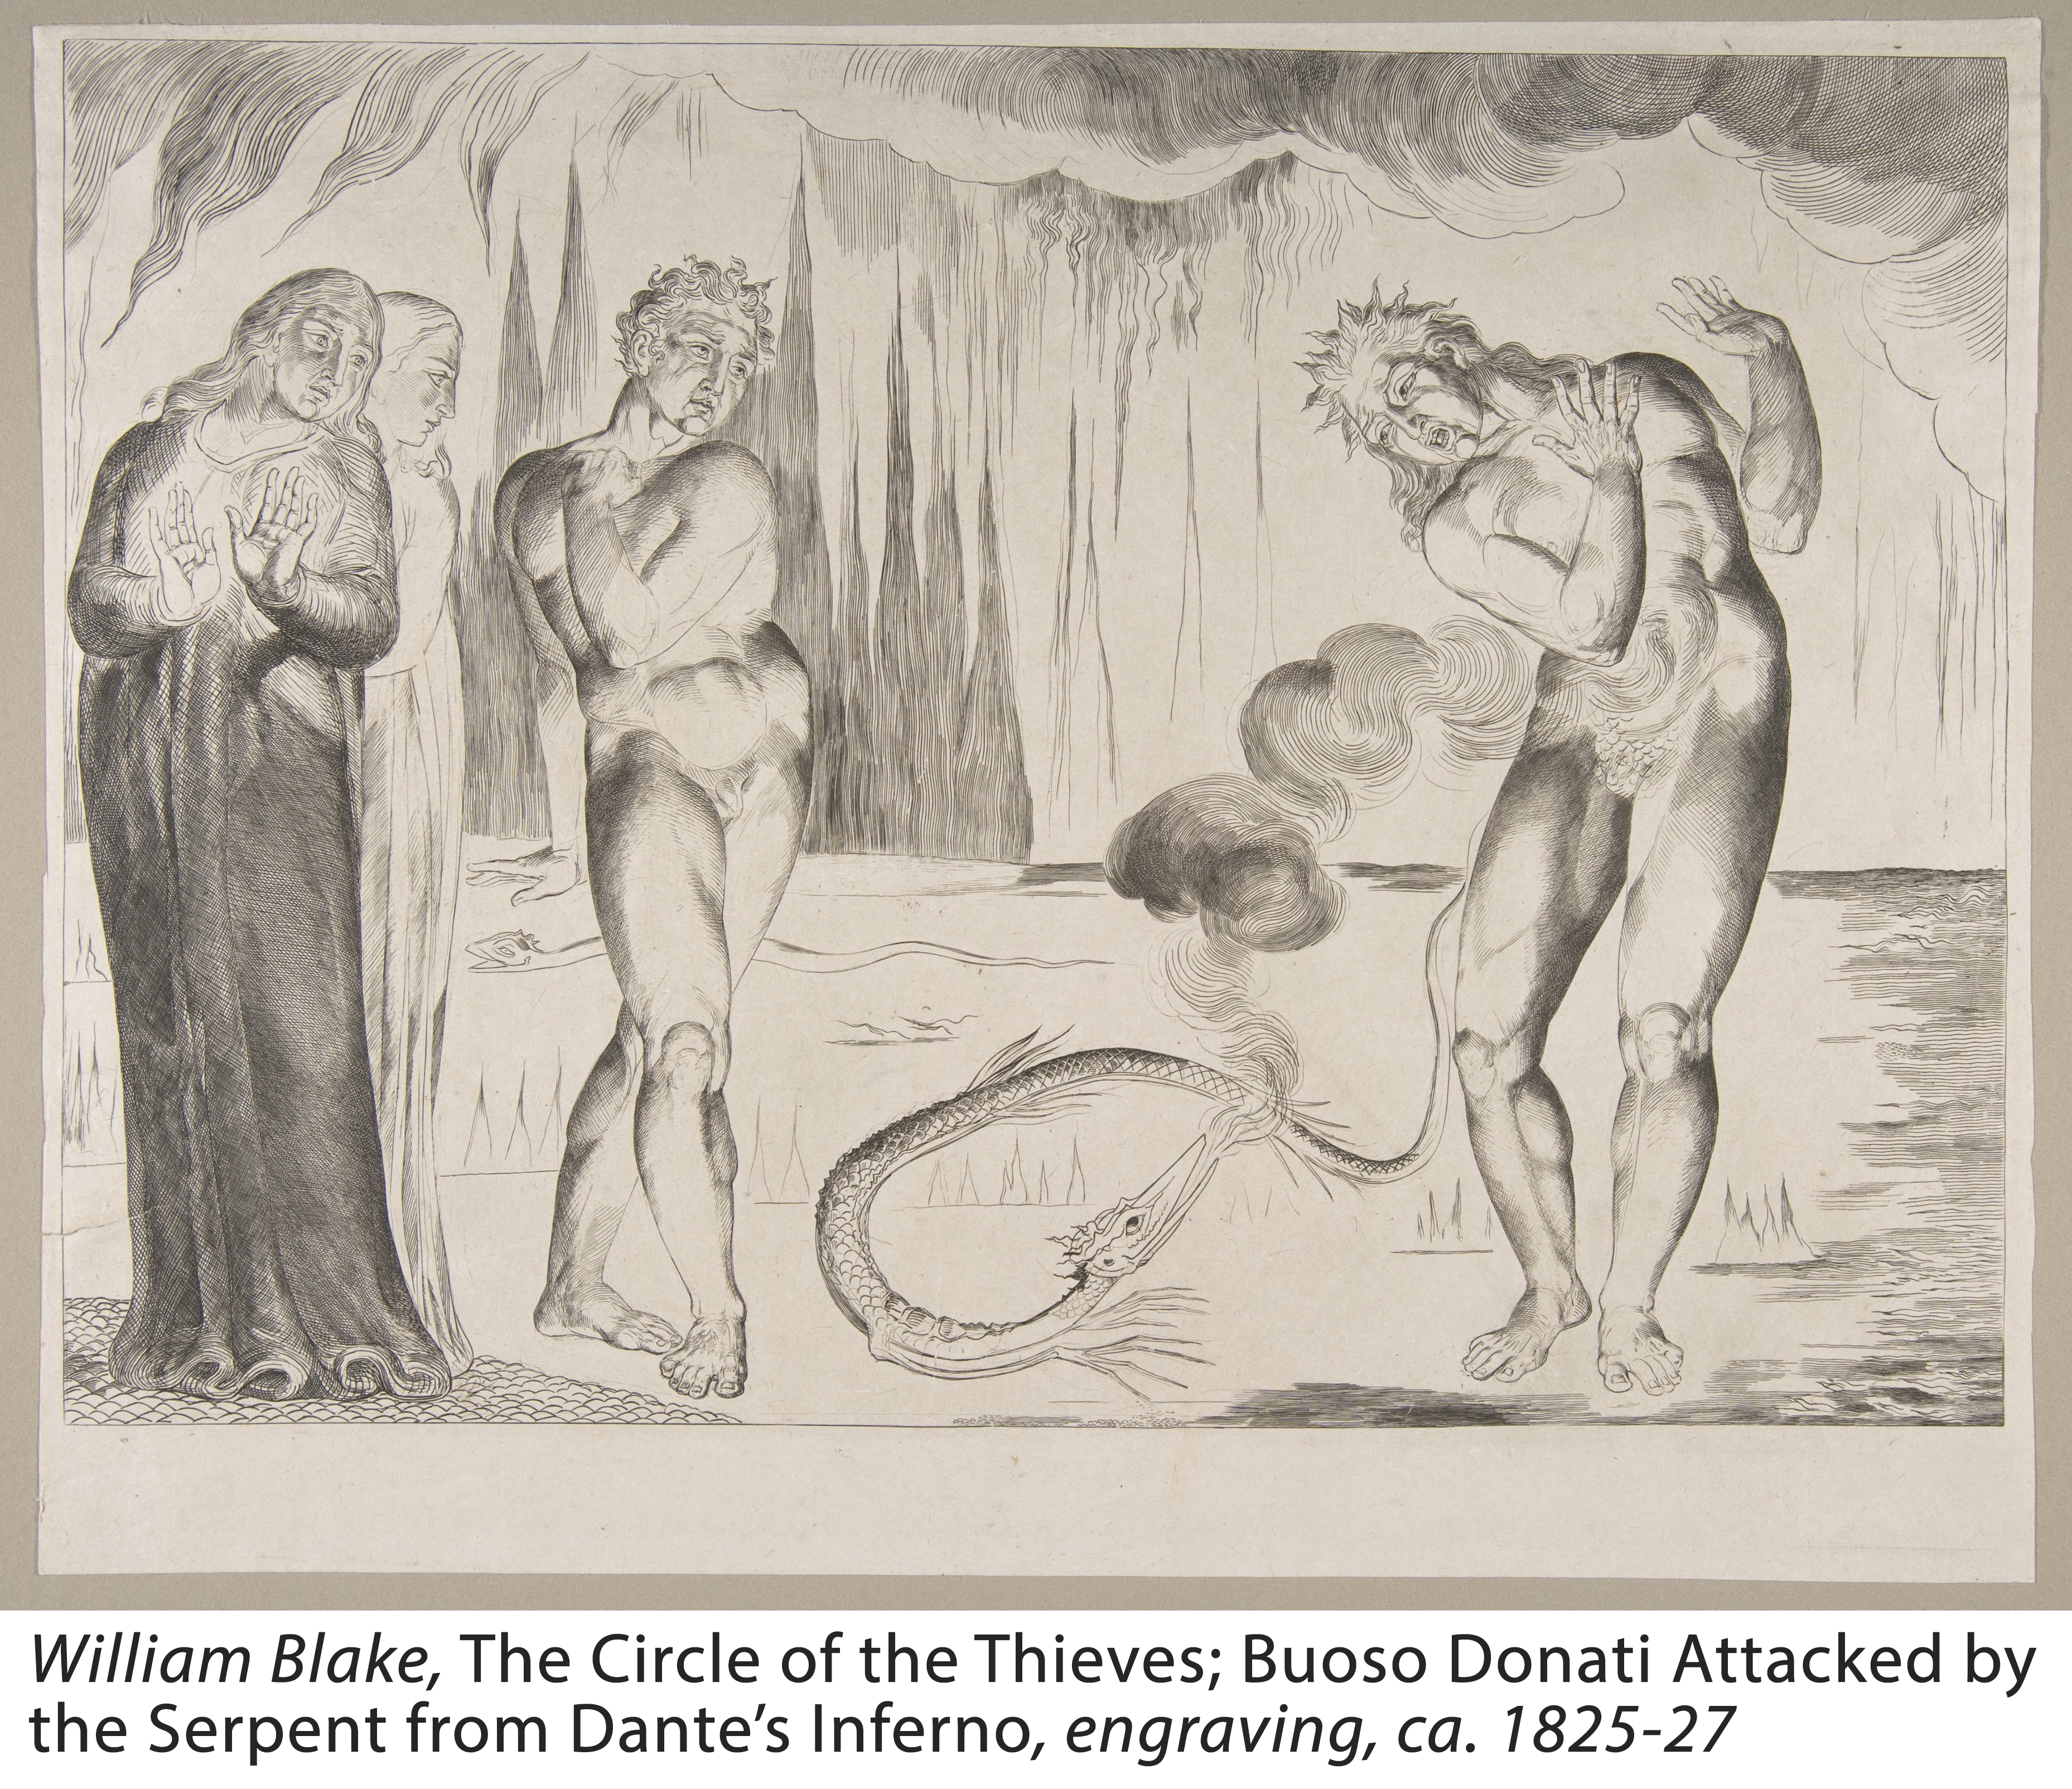 Engraving by William Blake, The Circle of the Thieves